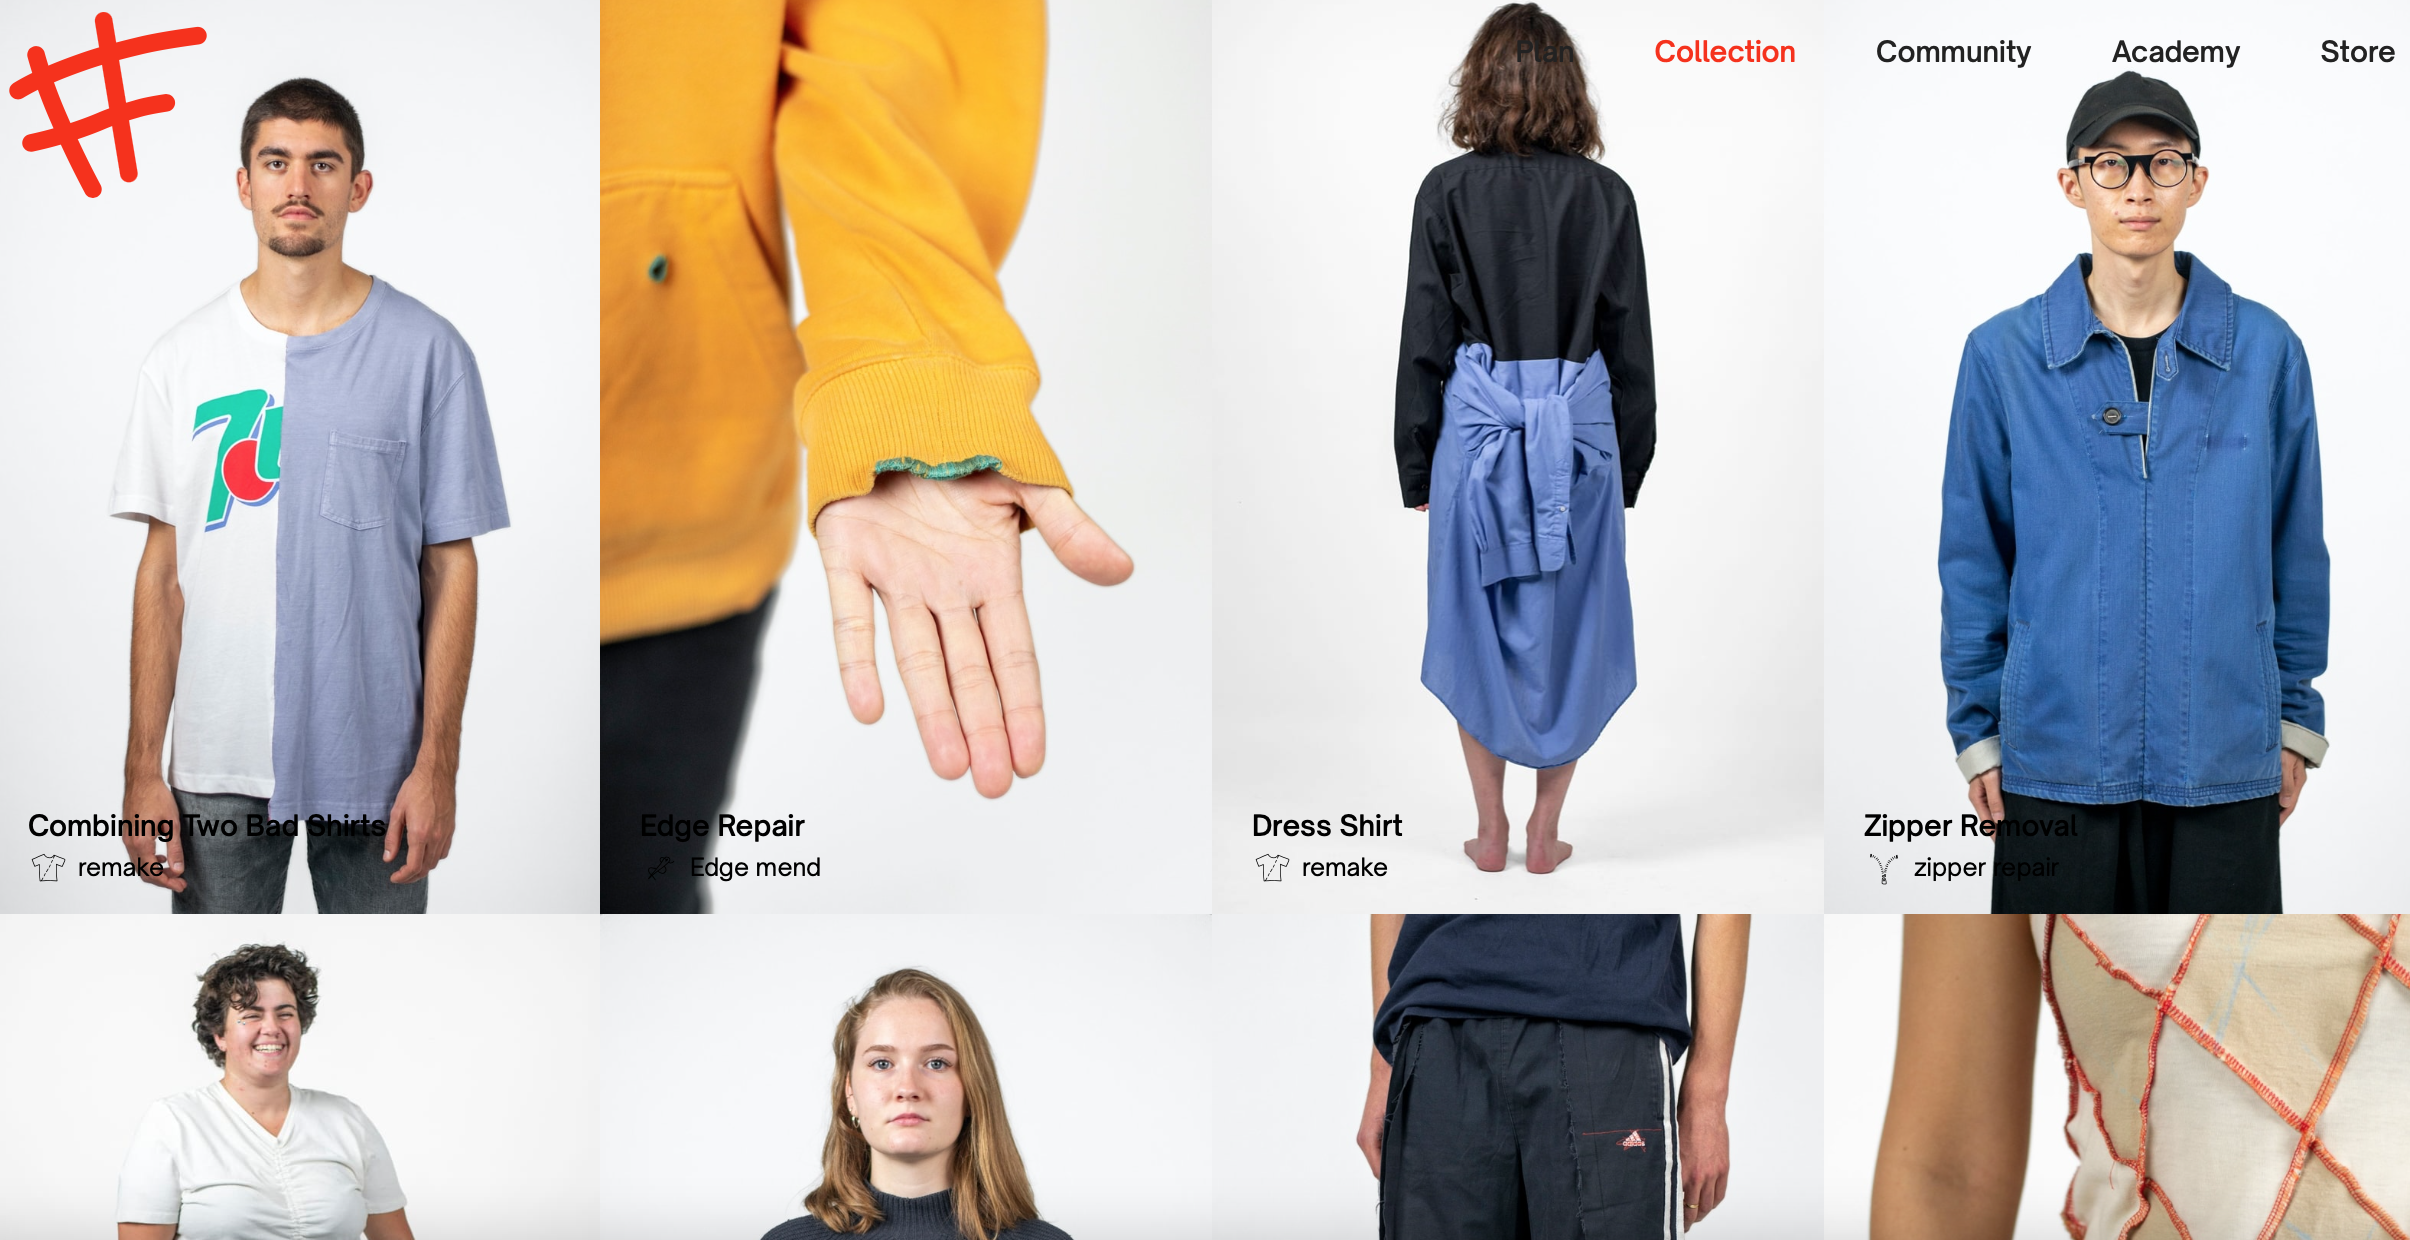 Degrowth? Collection at the Fixing Fashion website